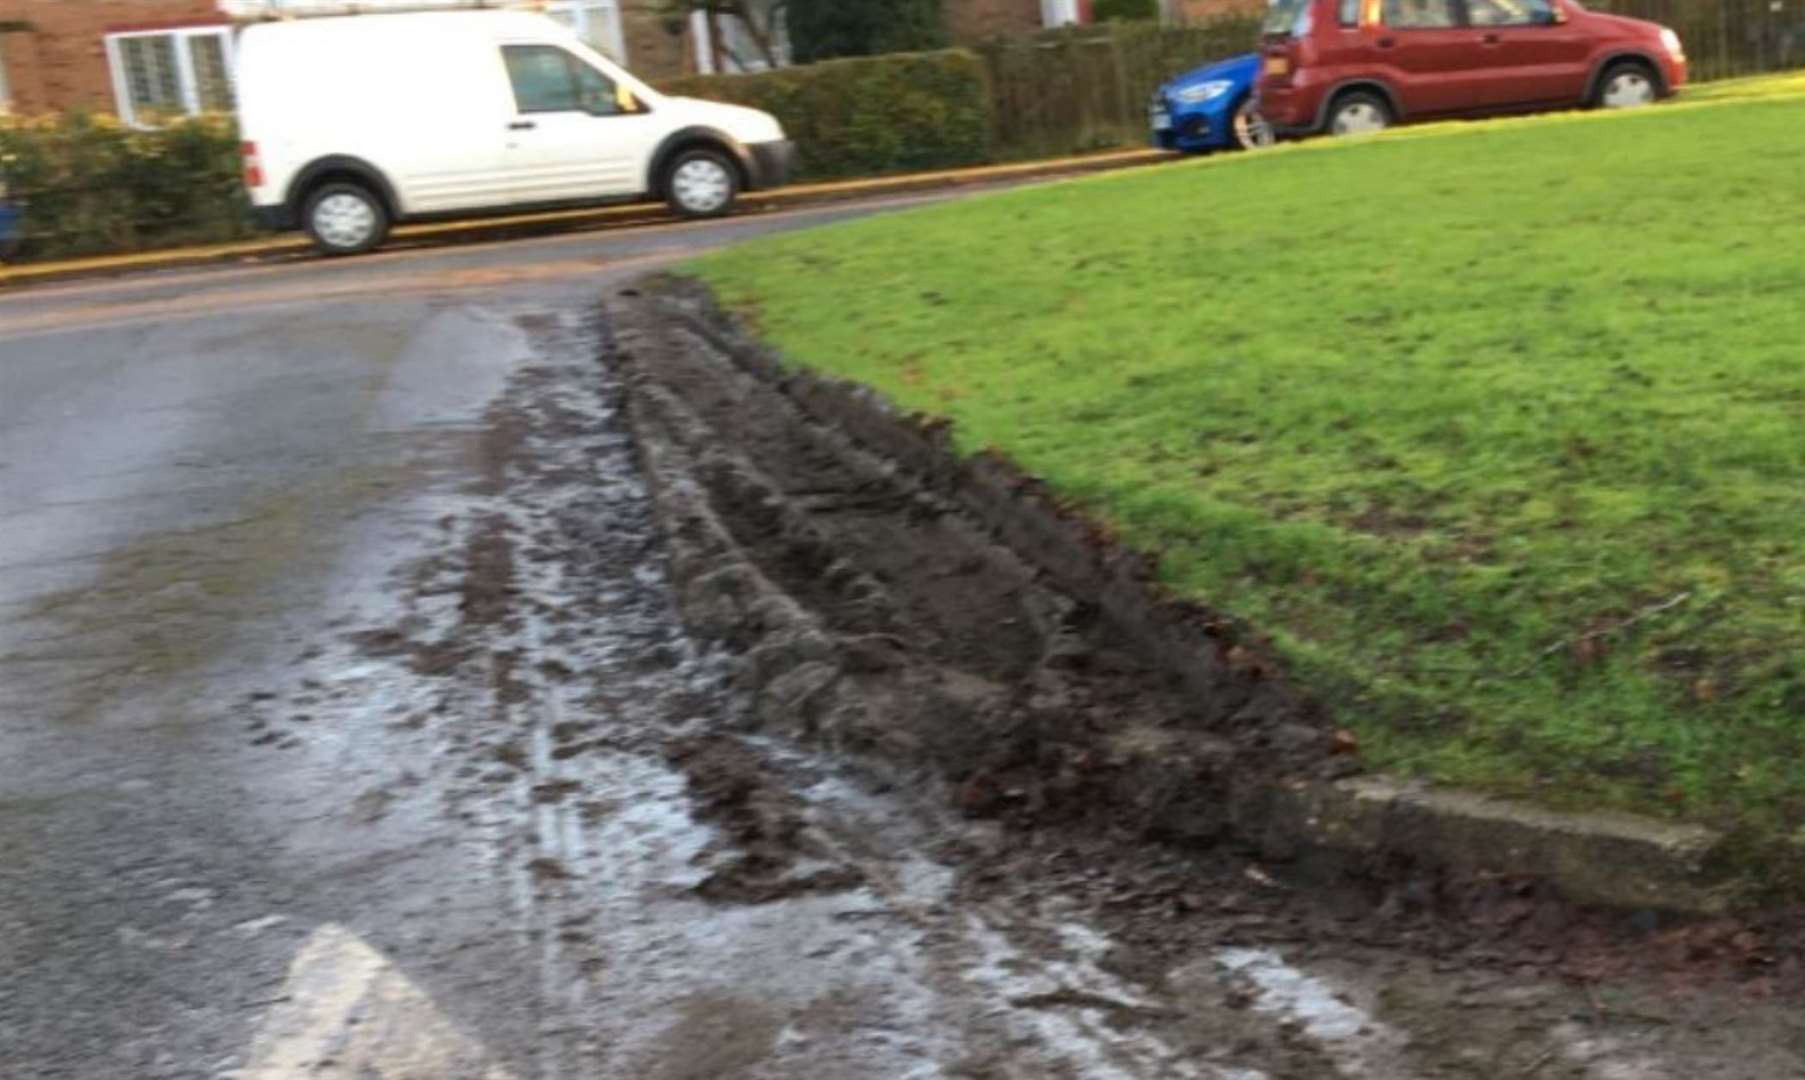 Part of the village green was churned up when a trucker tried to reverse. Picture: Cllr Paul Bartlett